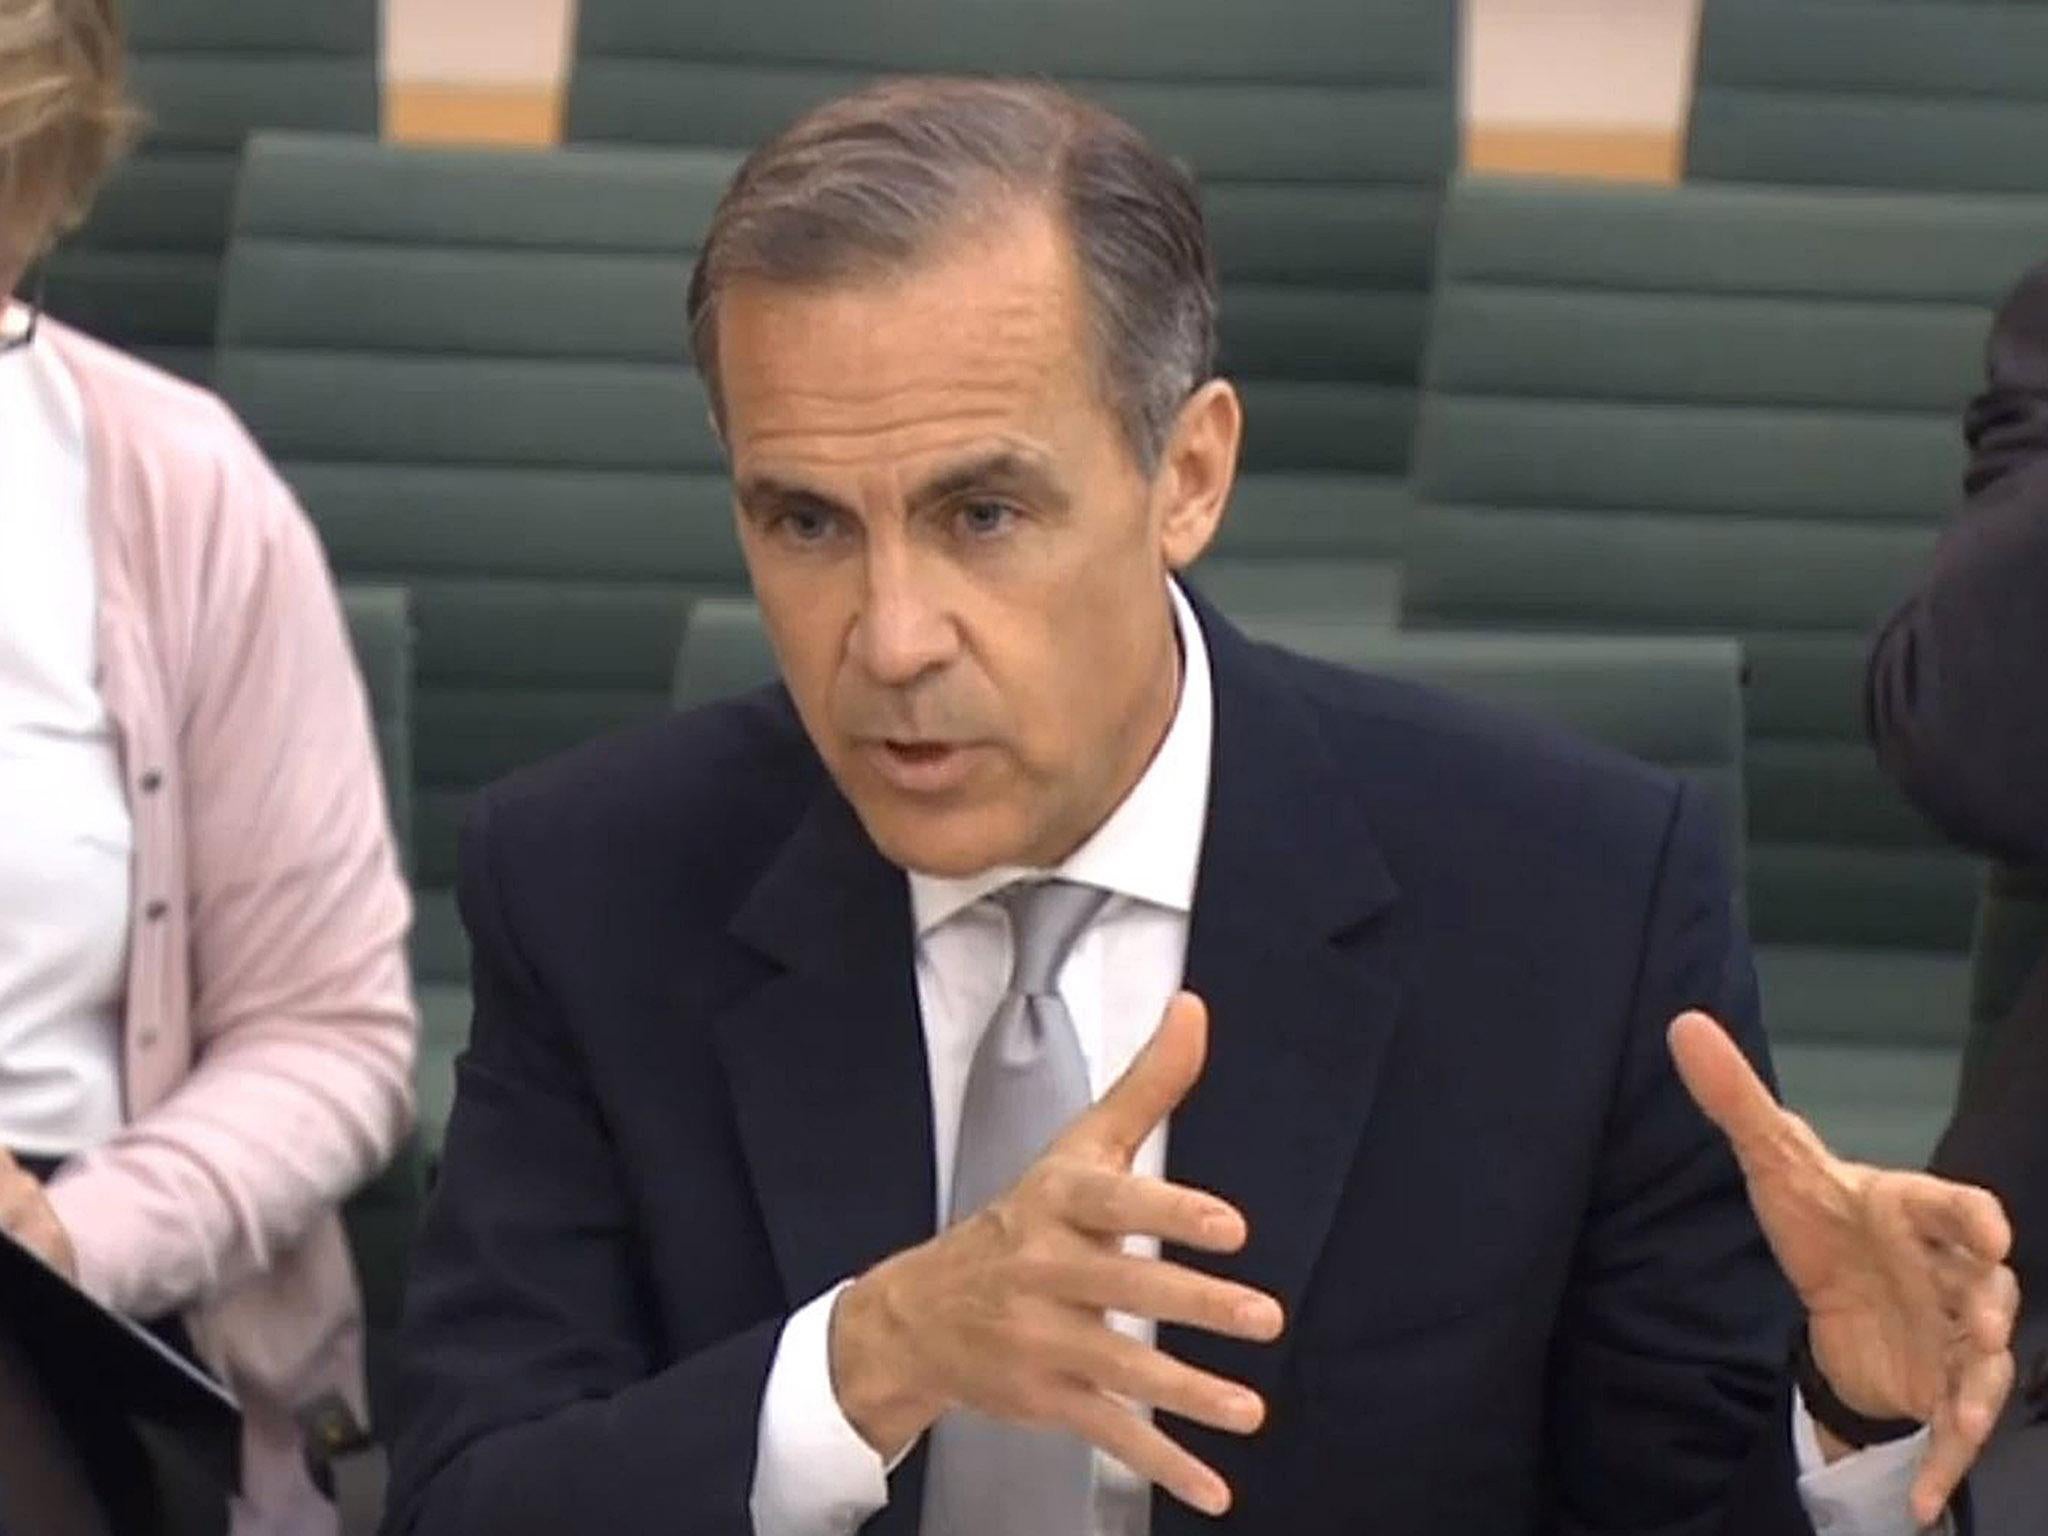 Bank of England Governor Mark Carney giving evidence to the Treasury Select Committee in the House of Commons